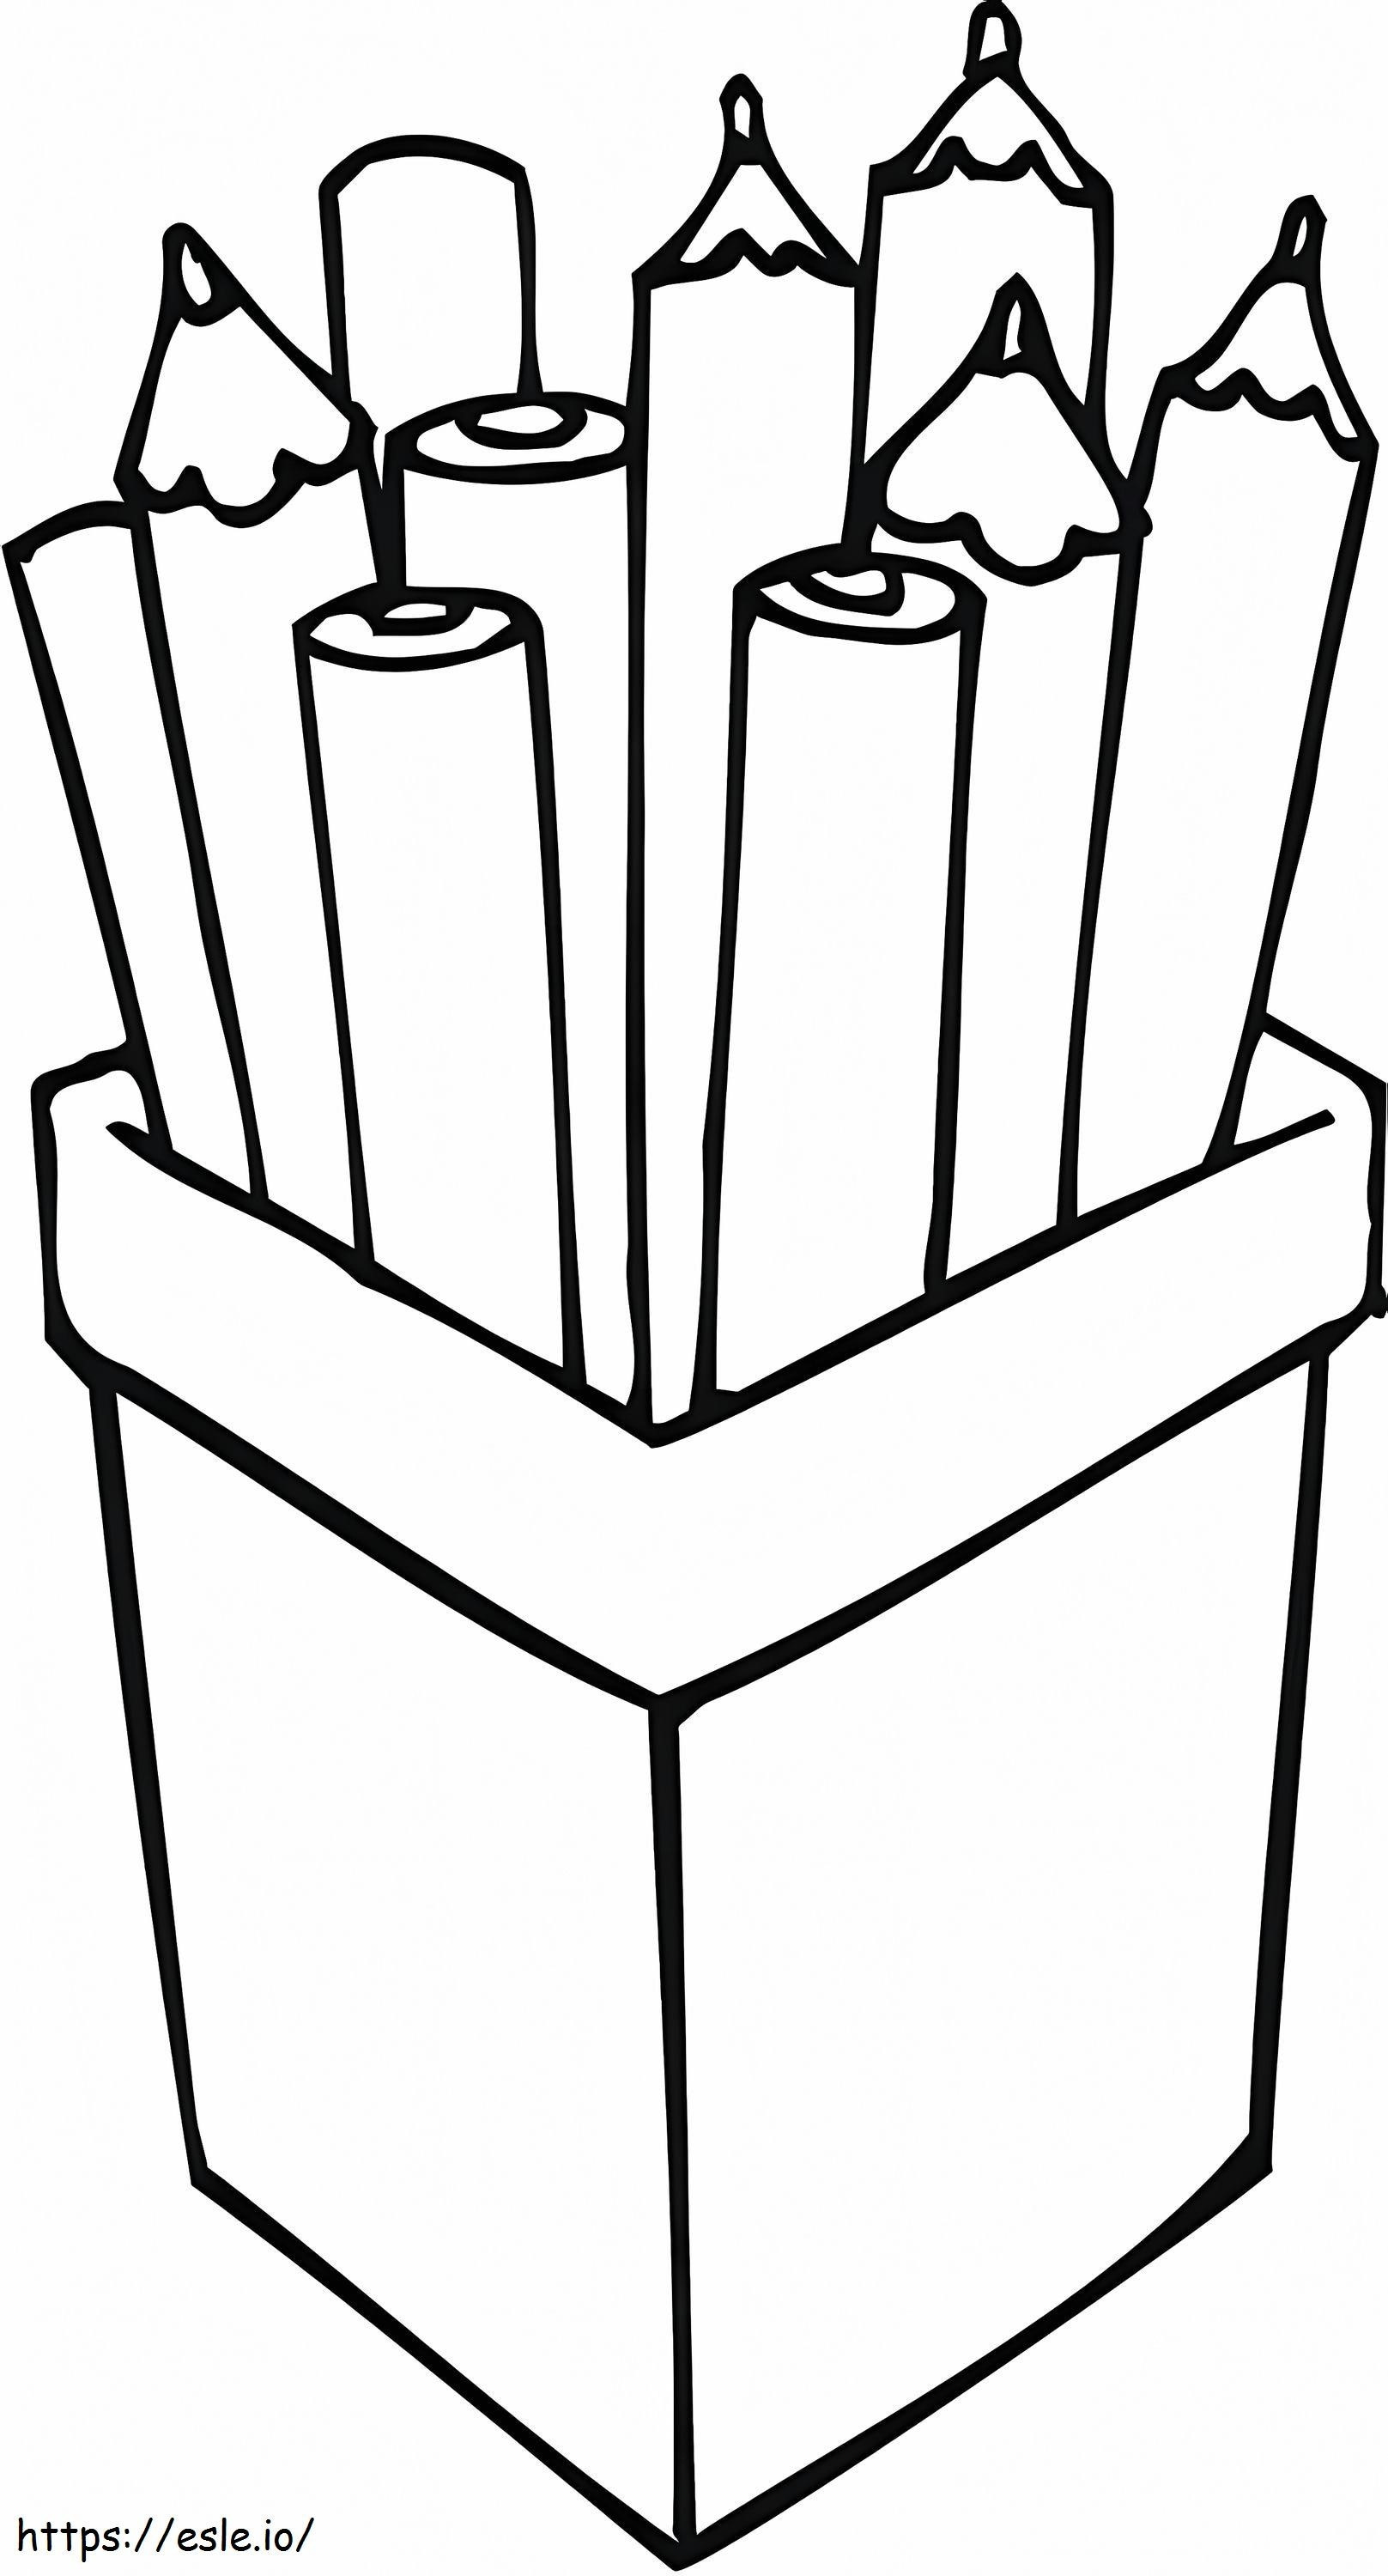 A Box Of Pencil coloring page